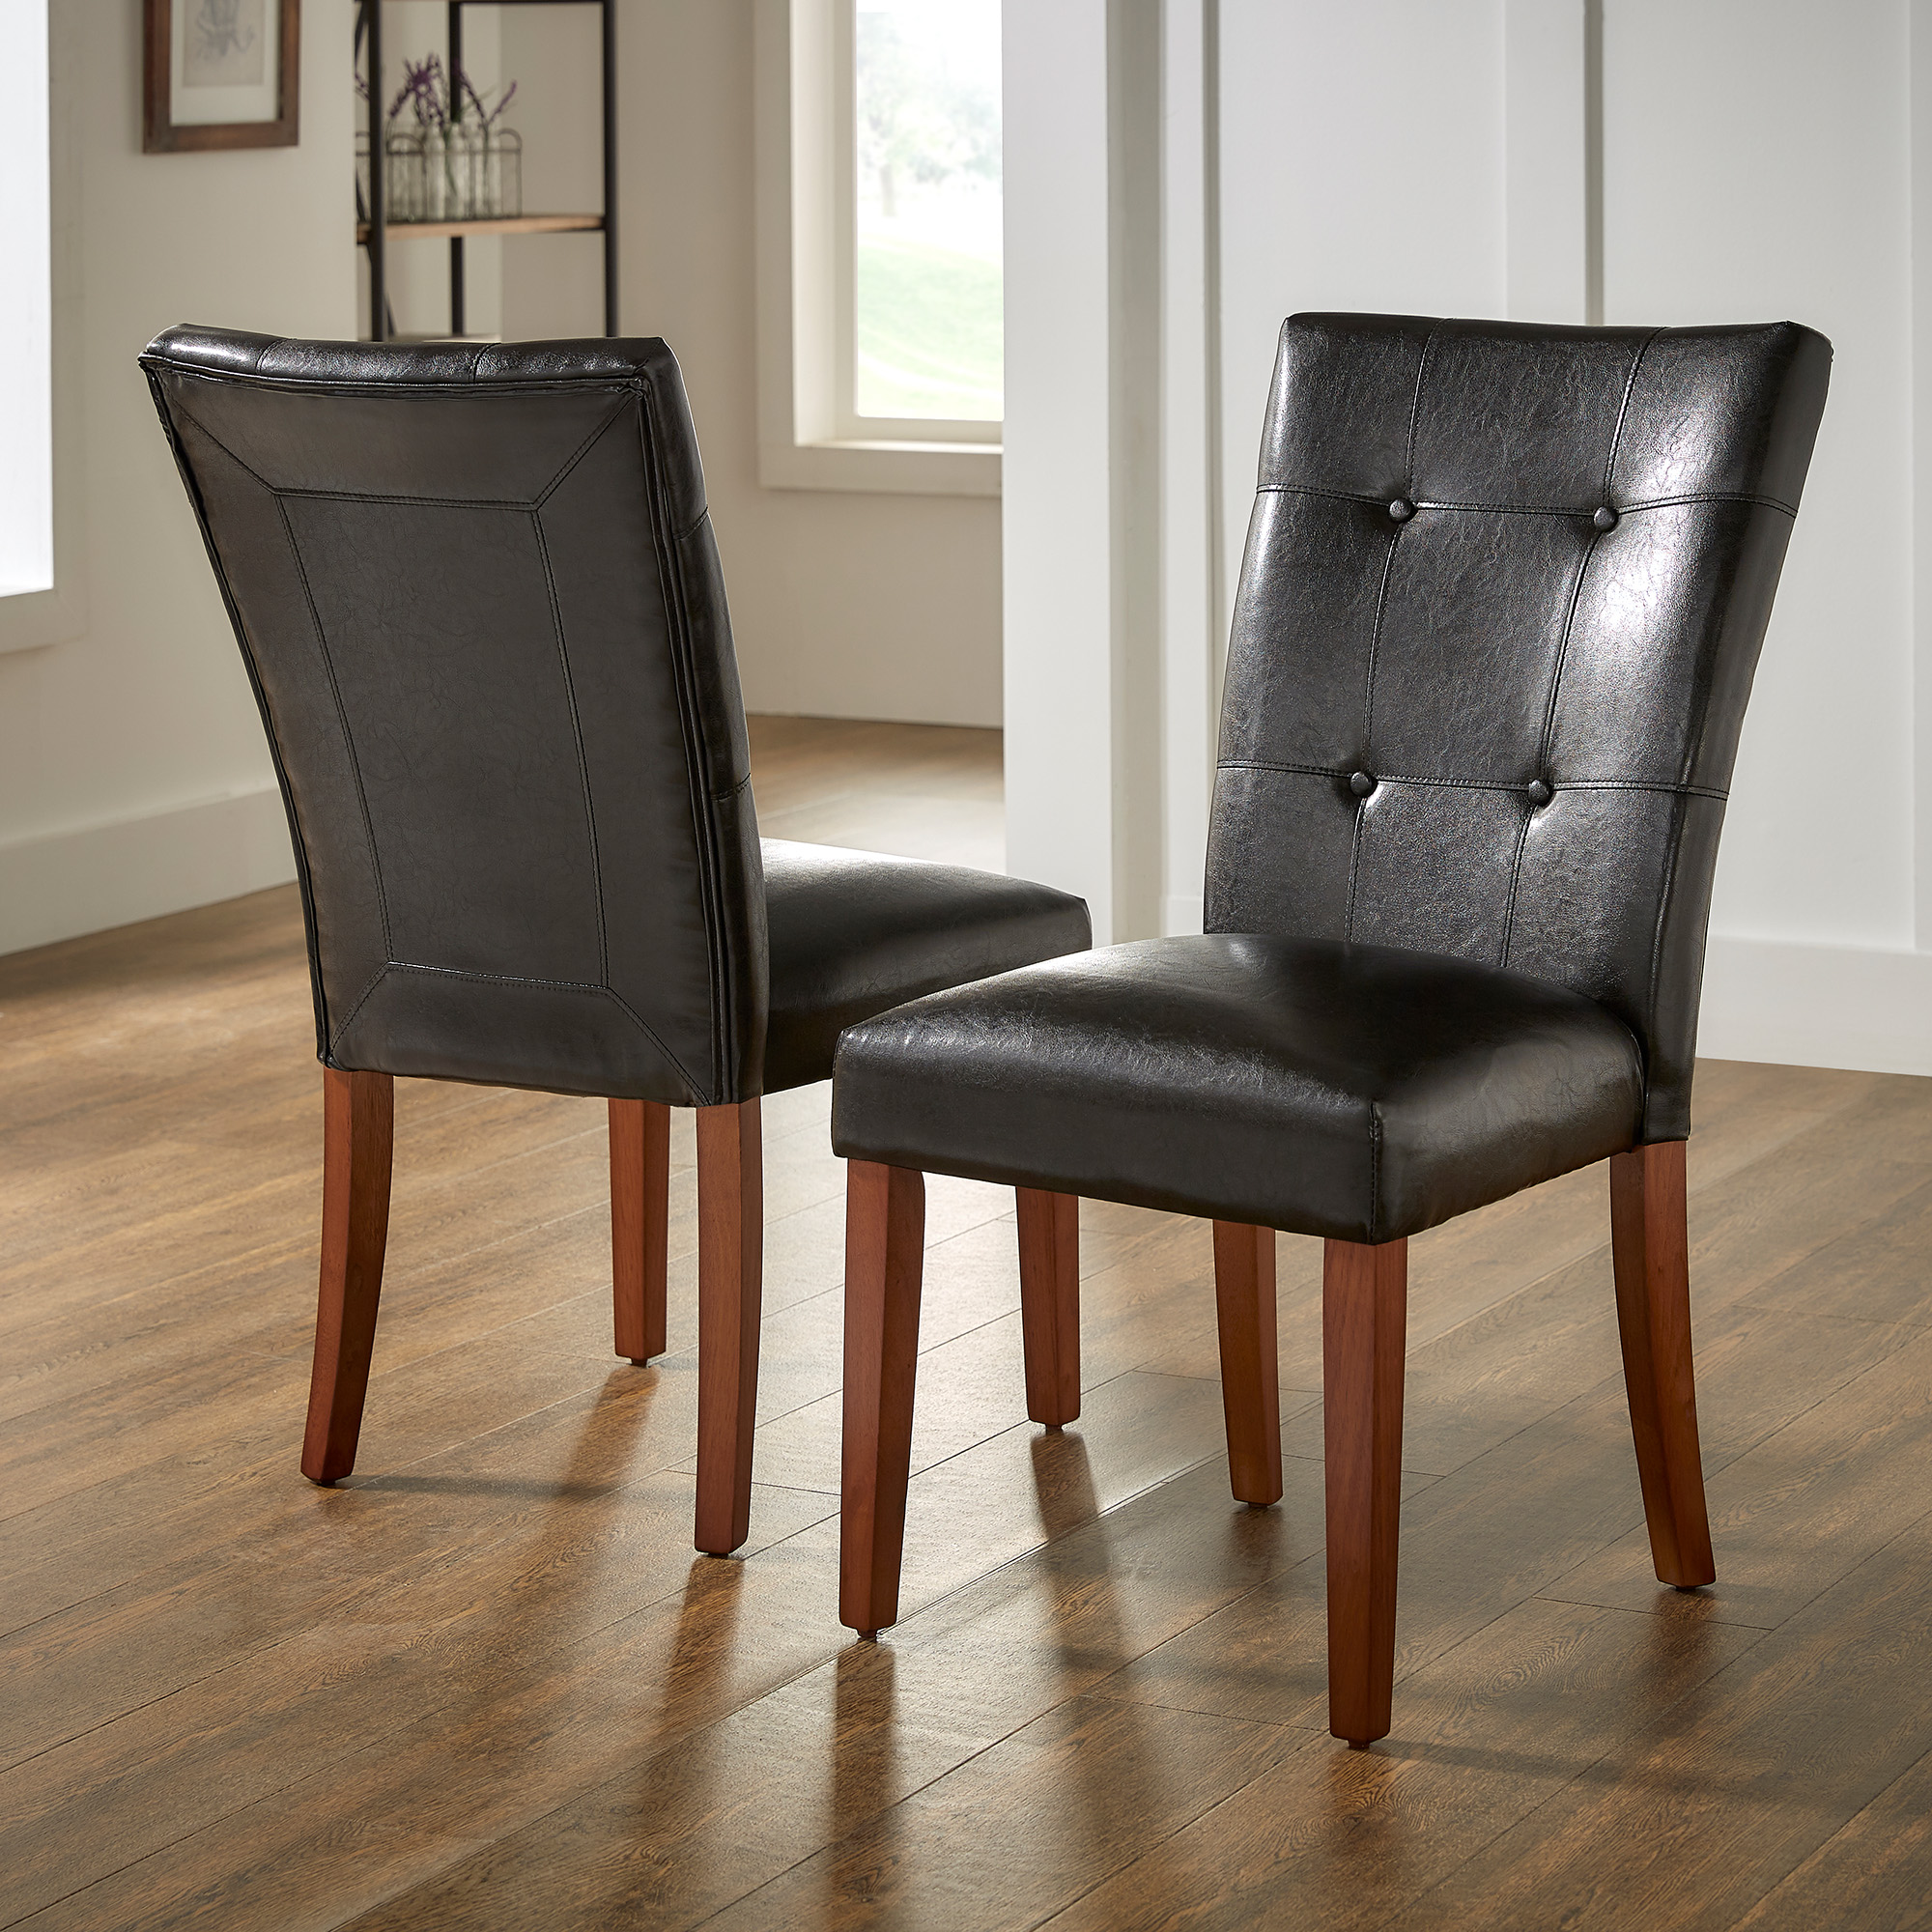 Tufted Faux Leather Dining Chairs (Set of 2)